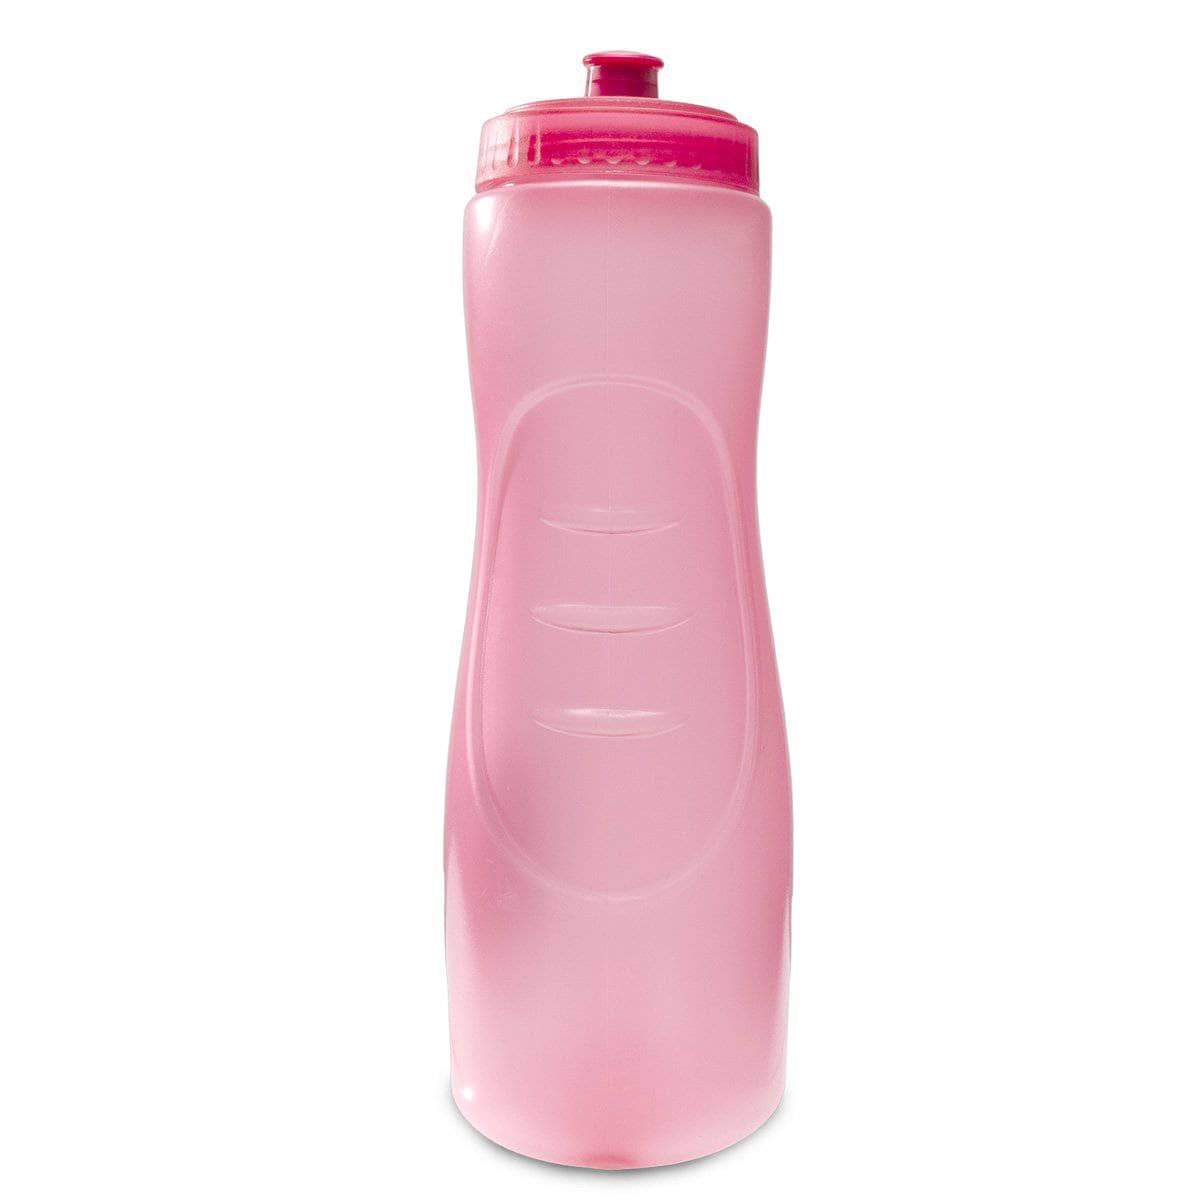 1pc Pink Time Marked Water Bottle, Transparent With Portable Strap And  Large Capacity For Outdoor Sports